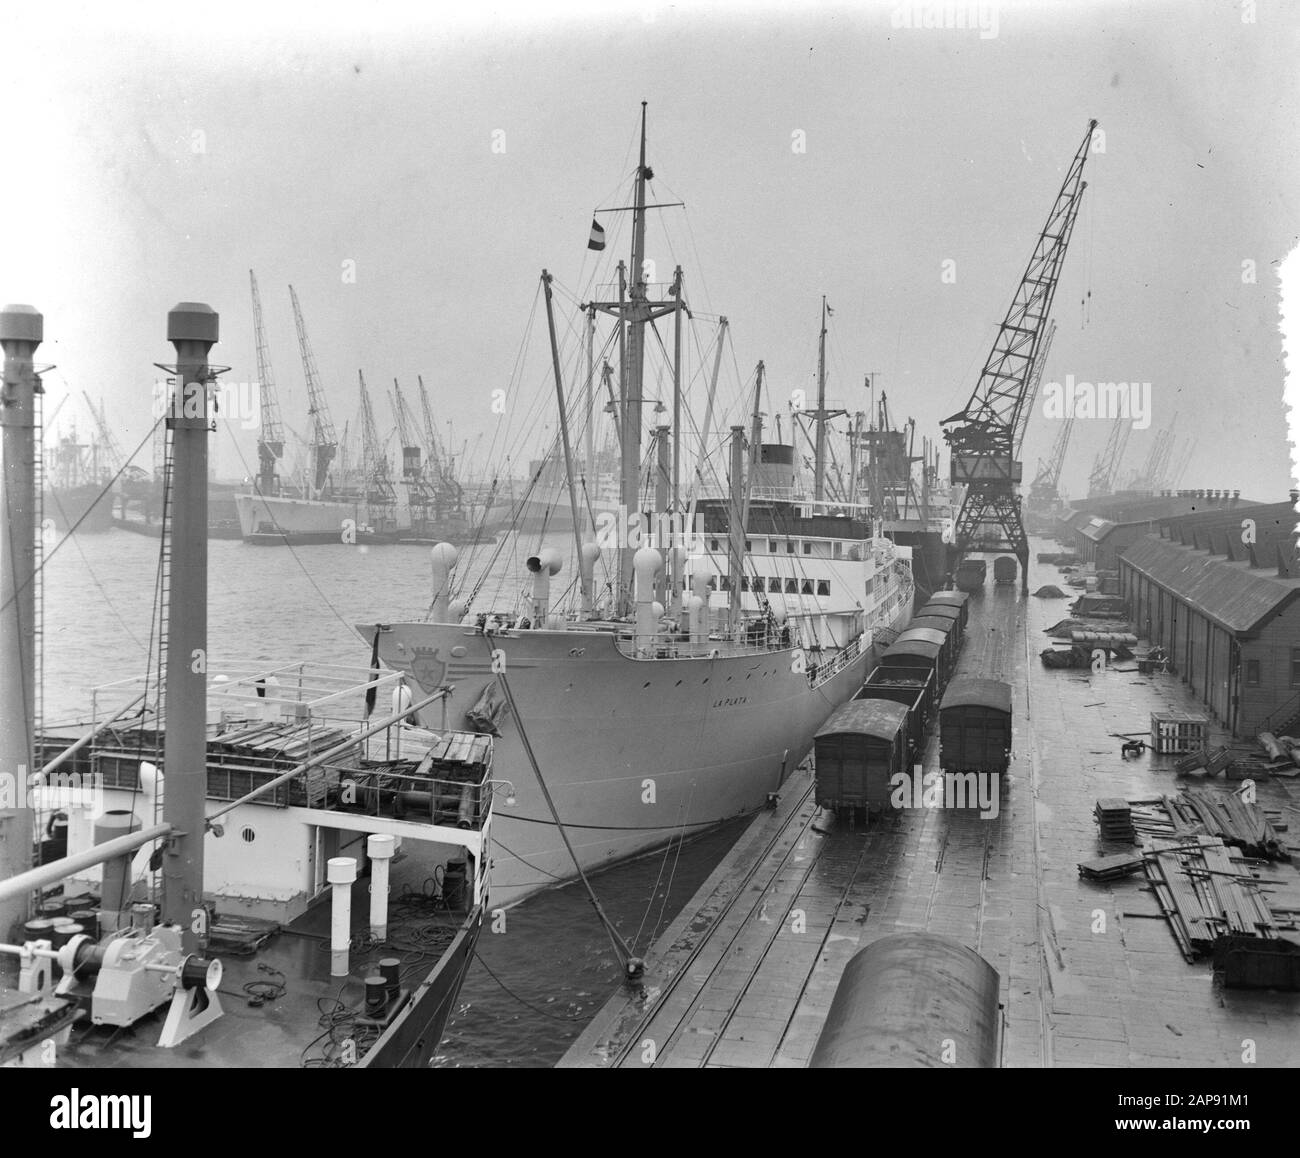 20,000th ship in port Rotterdam La Plata from Sweden Date: 24 December 1955 Location: Rotterdam, South-Holland Keywords: PORTS, ships Personal name: la plata Stock Photo